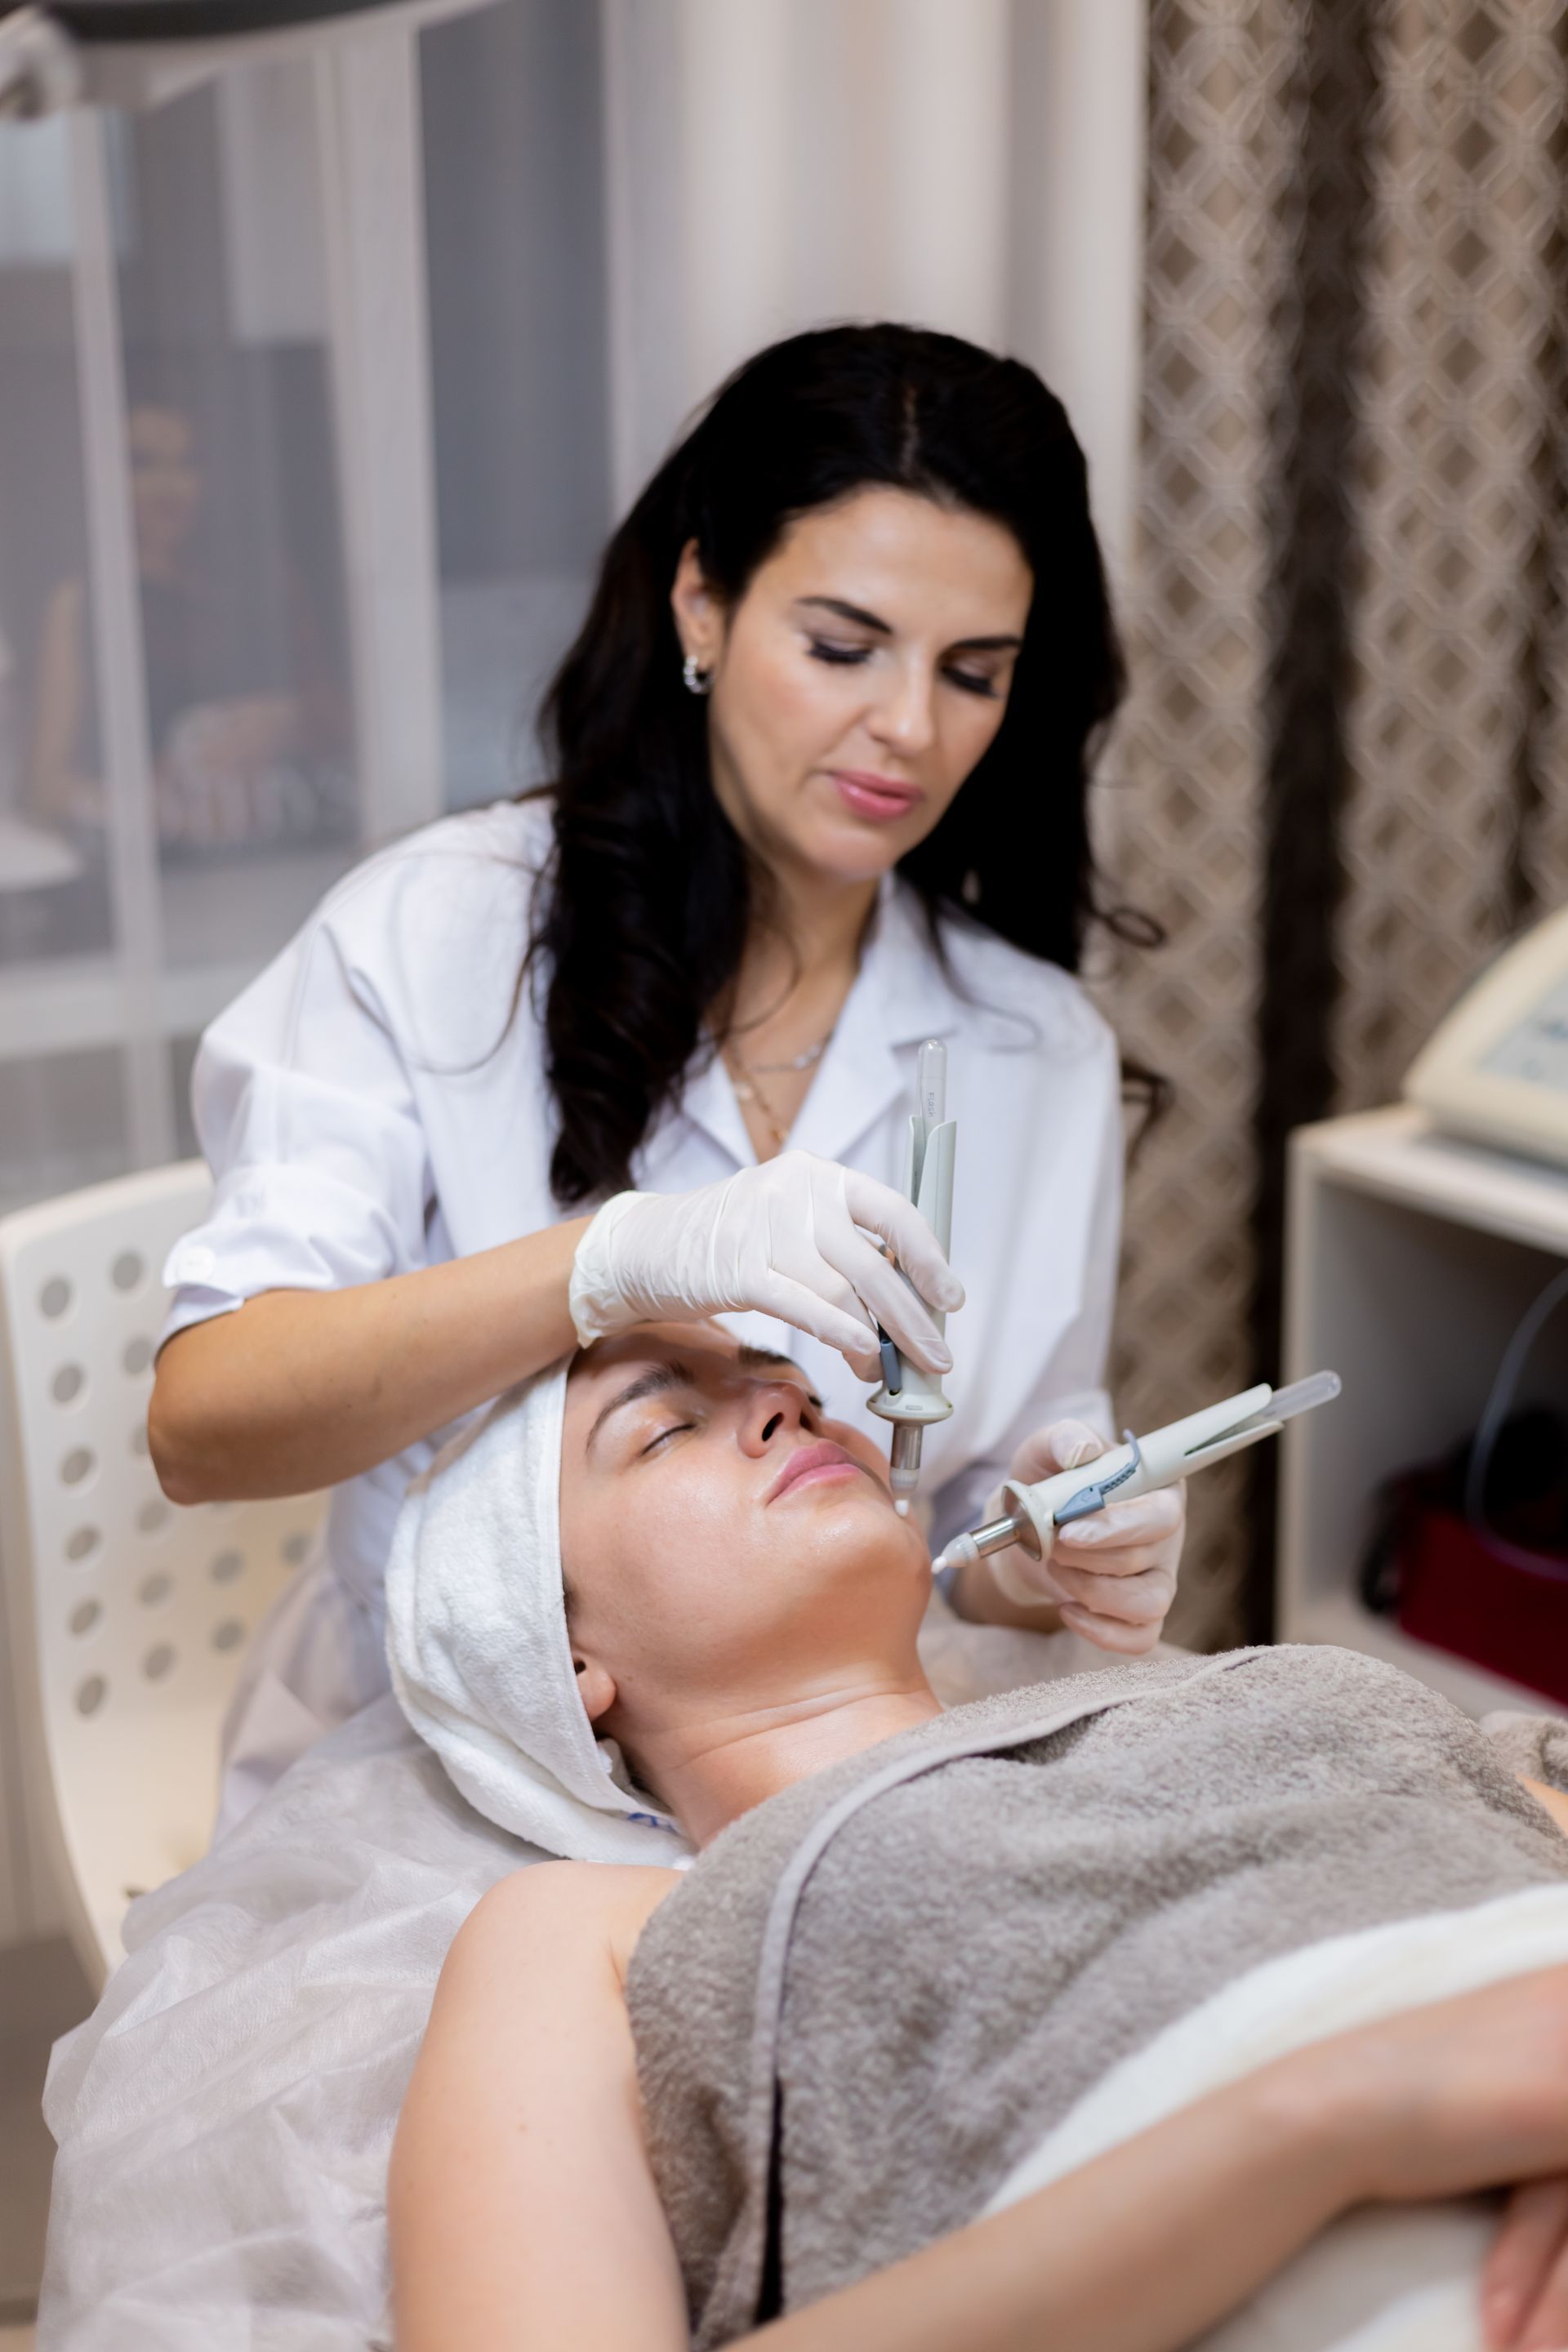 a woman is getting a facial treatment at a beauty salon .